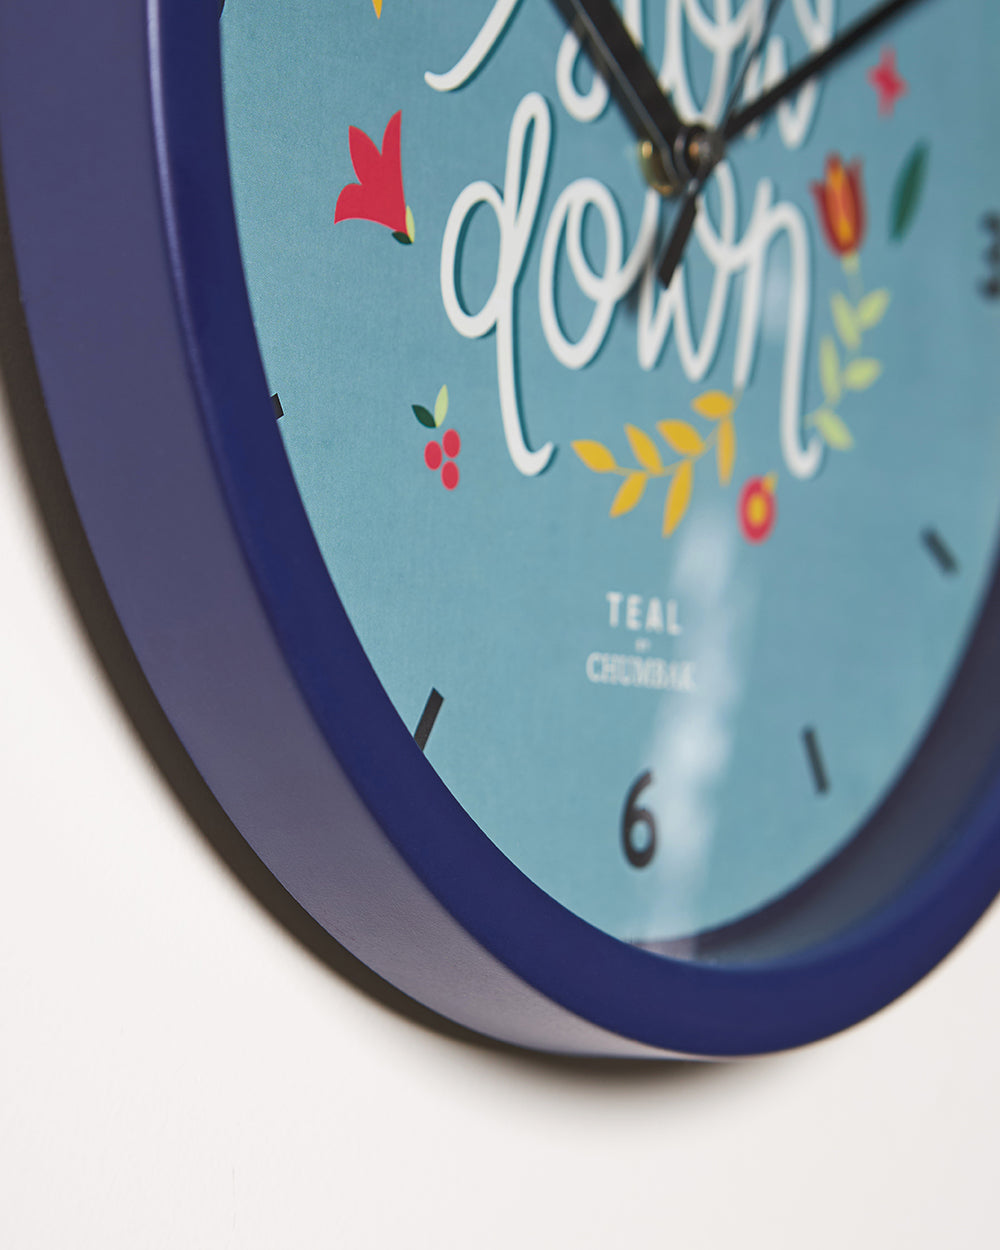 Teal by Chumbak | Slow Down Wall Clock | 11 inch